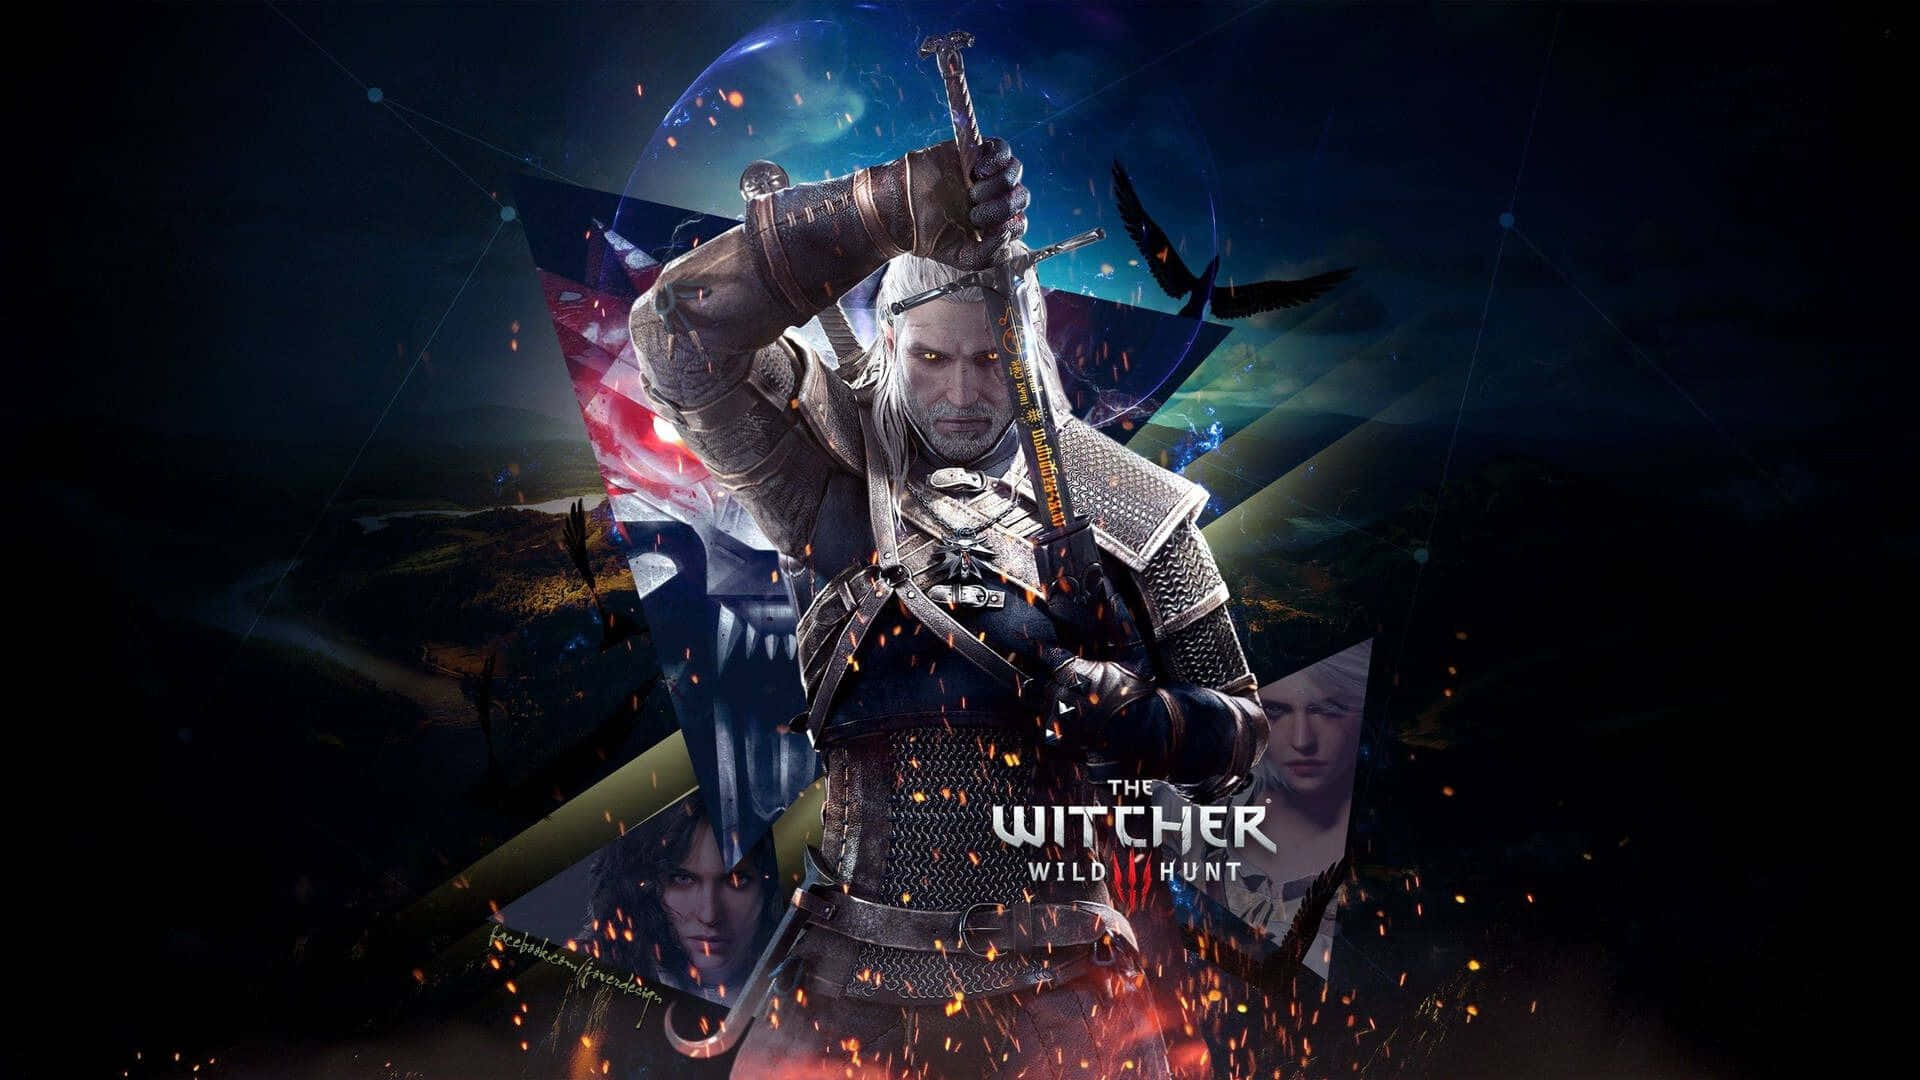 Experience an epic journey to the world of The Witcher 3